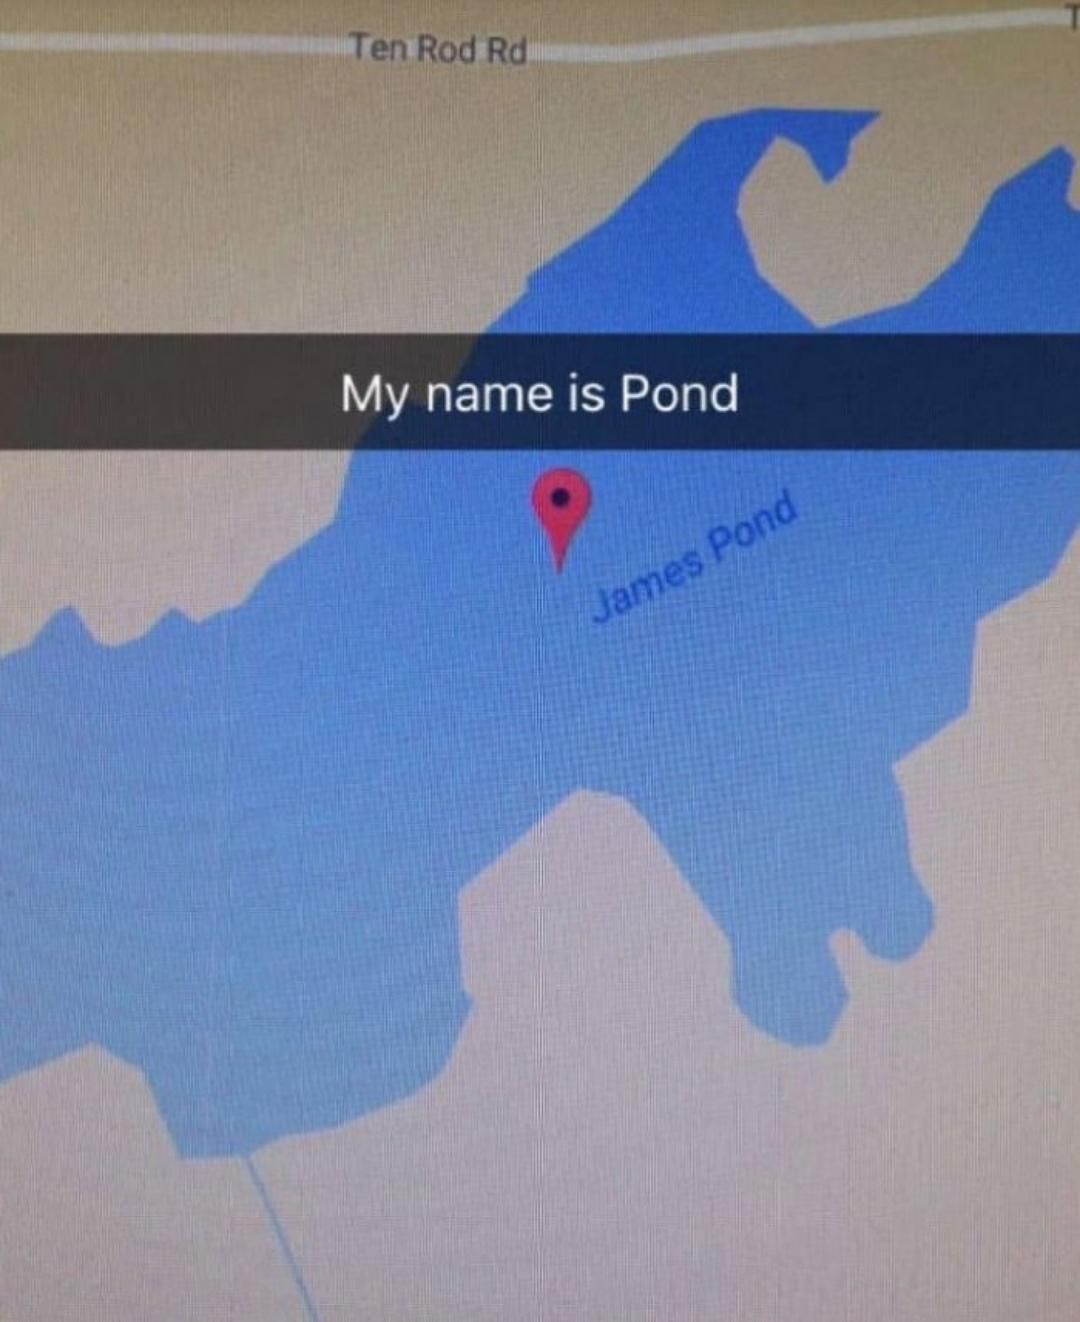 Agent Pond reporting for duty